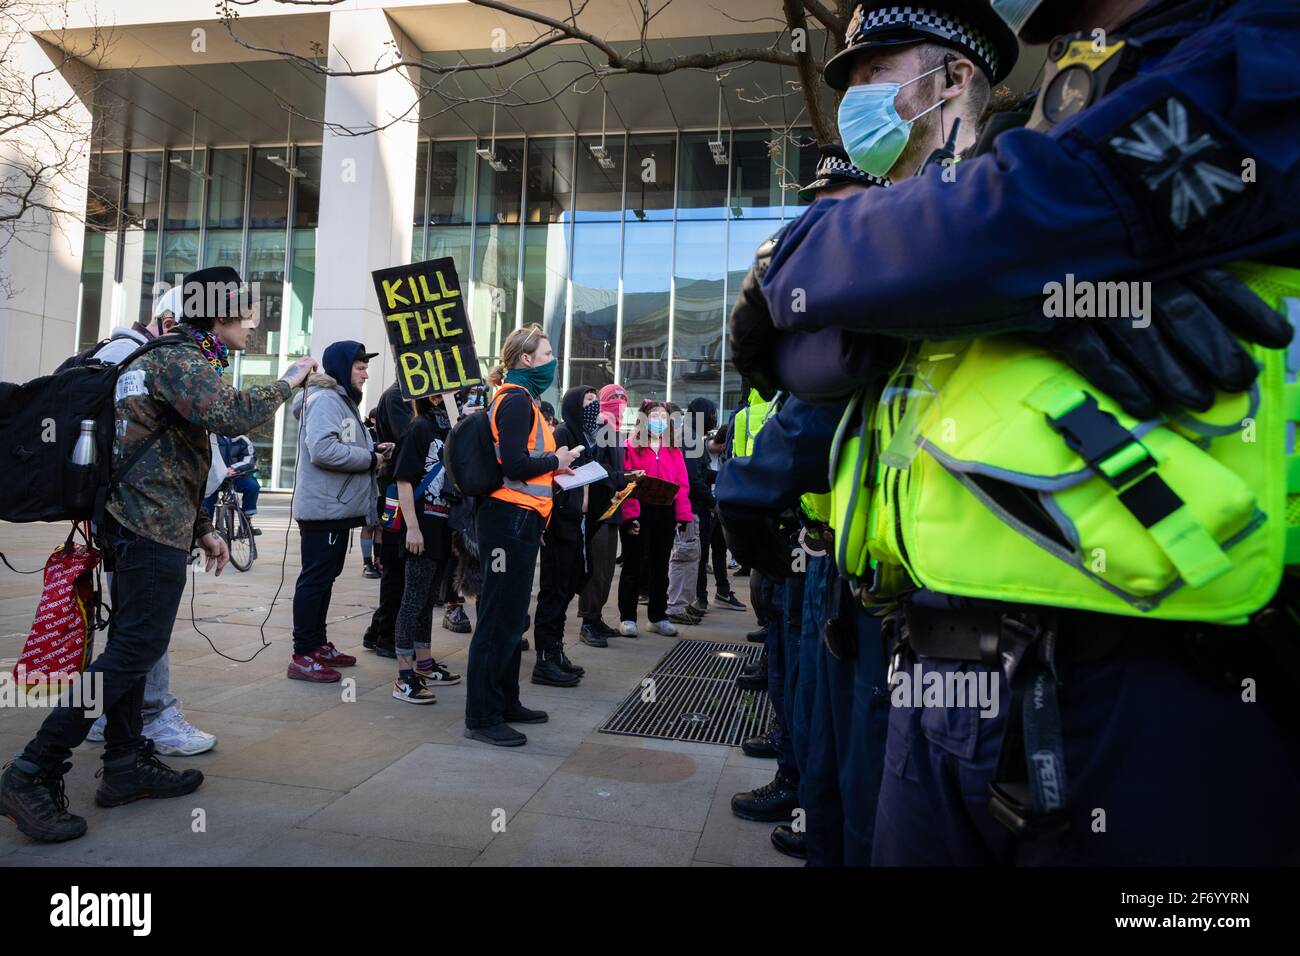 Manchester, UK. 03rd Apr, 2021. Police create a cordon to stop protesters during a ÔKill The BillÕ demonstration. Protests continue throughout the country due to the proposed Police, Crime and Sentencing Bill that, if passed, would introduce new legislation around protesting. Credit: Andy Barton/Alamy Live News Stock Photo